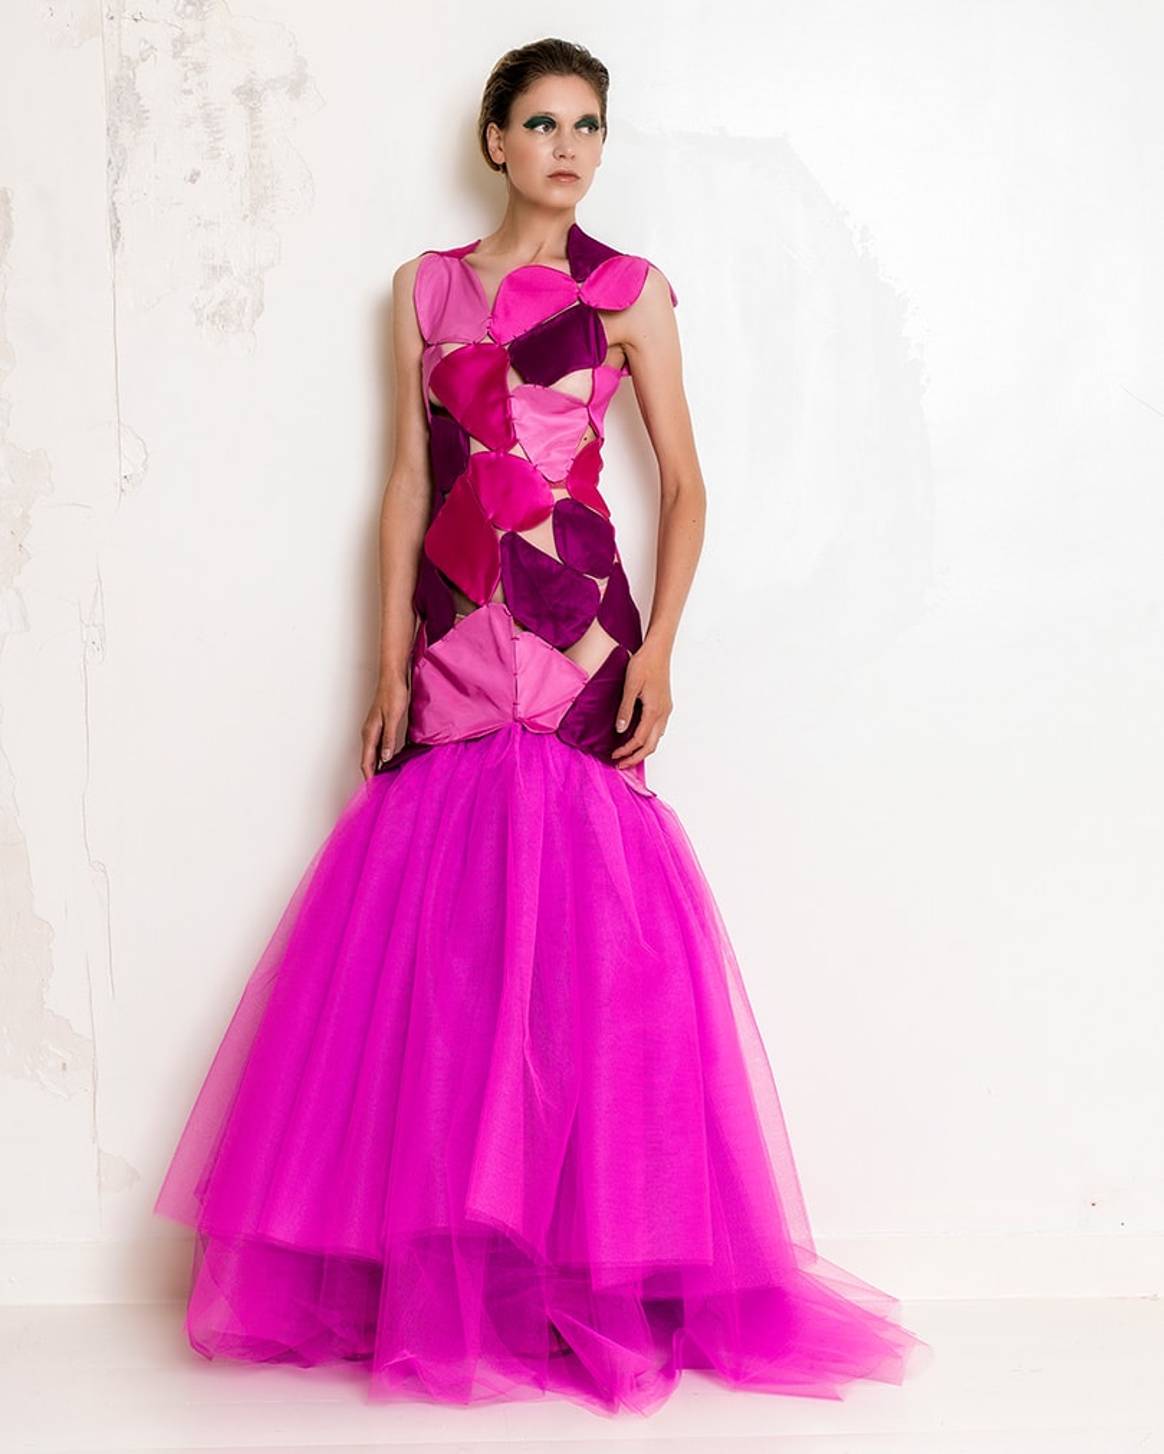 Imane Ayissi creates couture collection from scrap fabrics